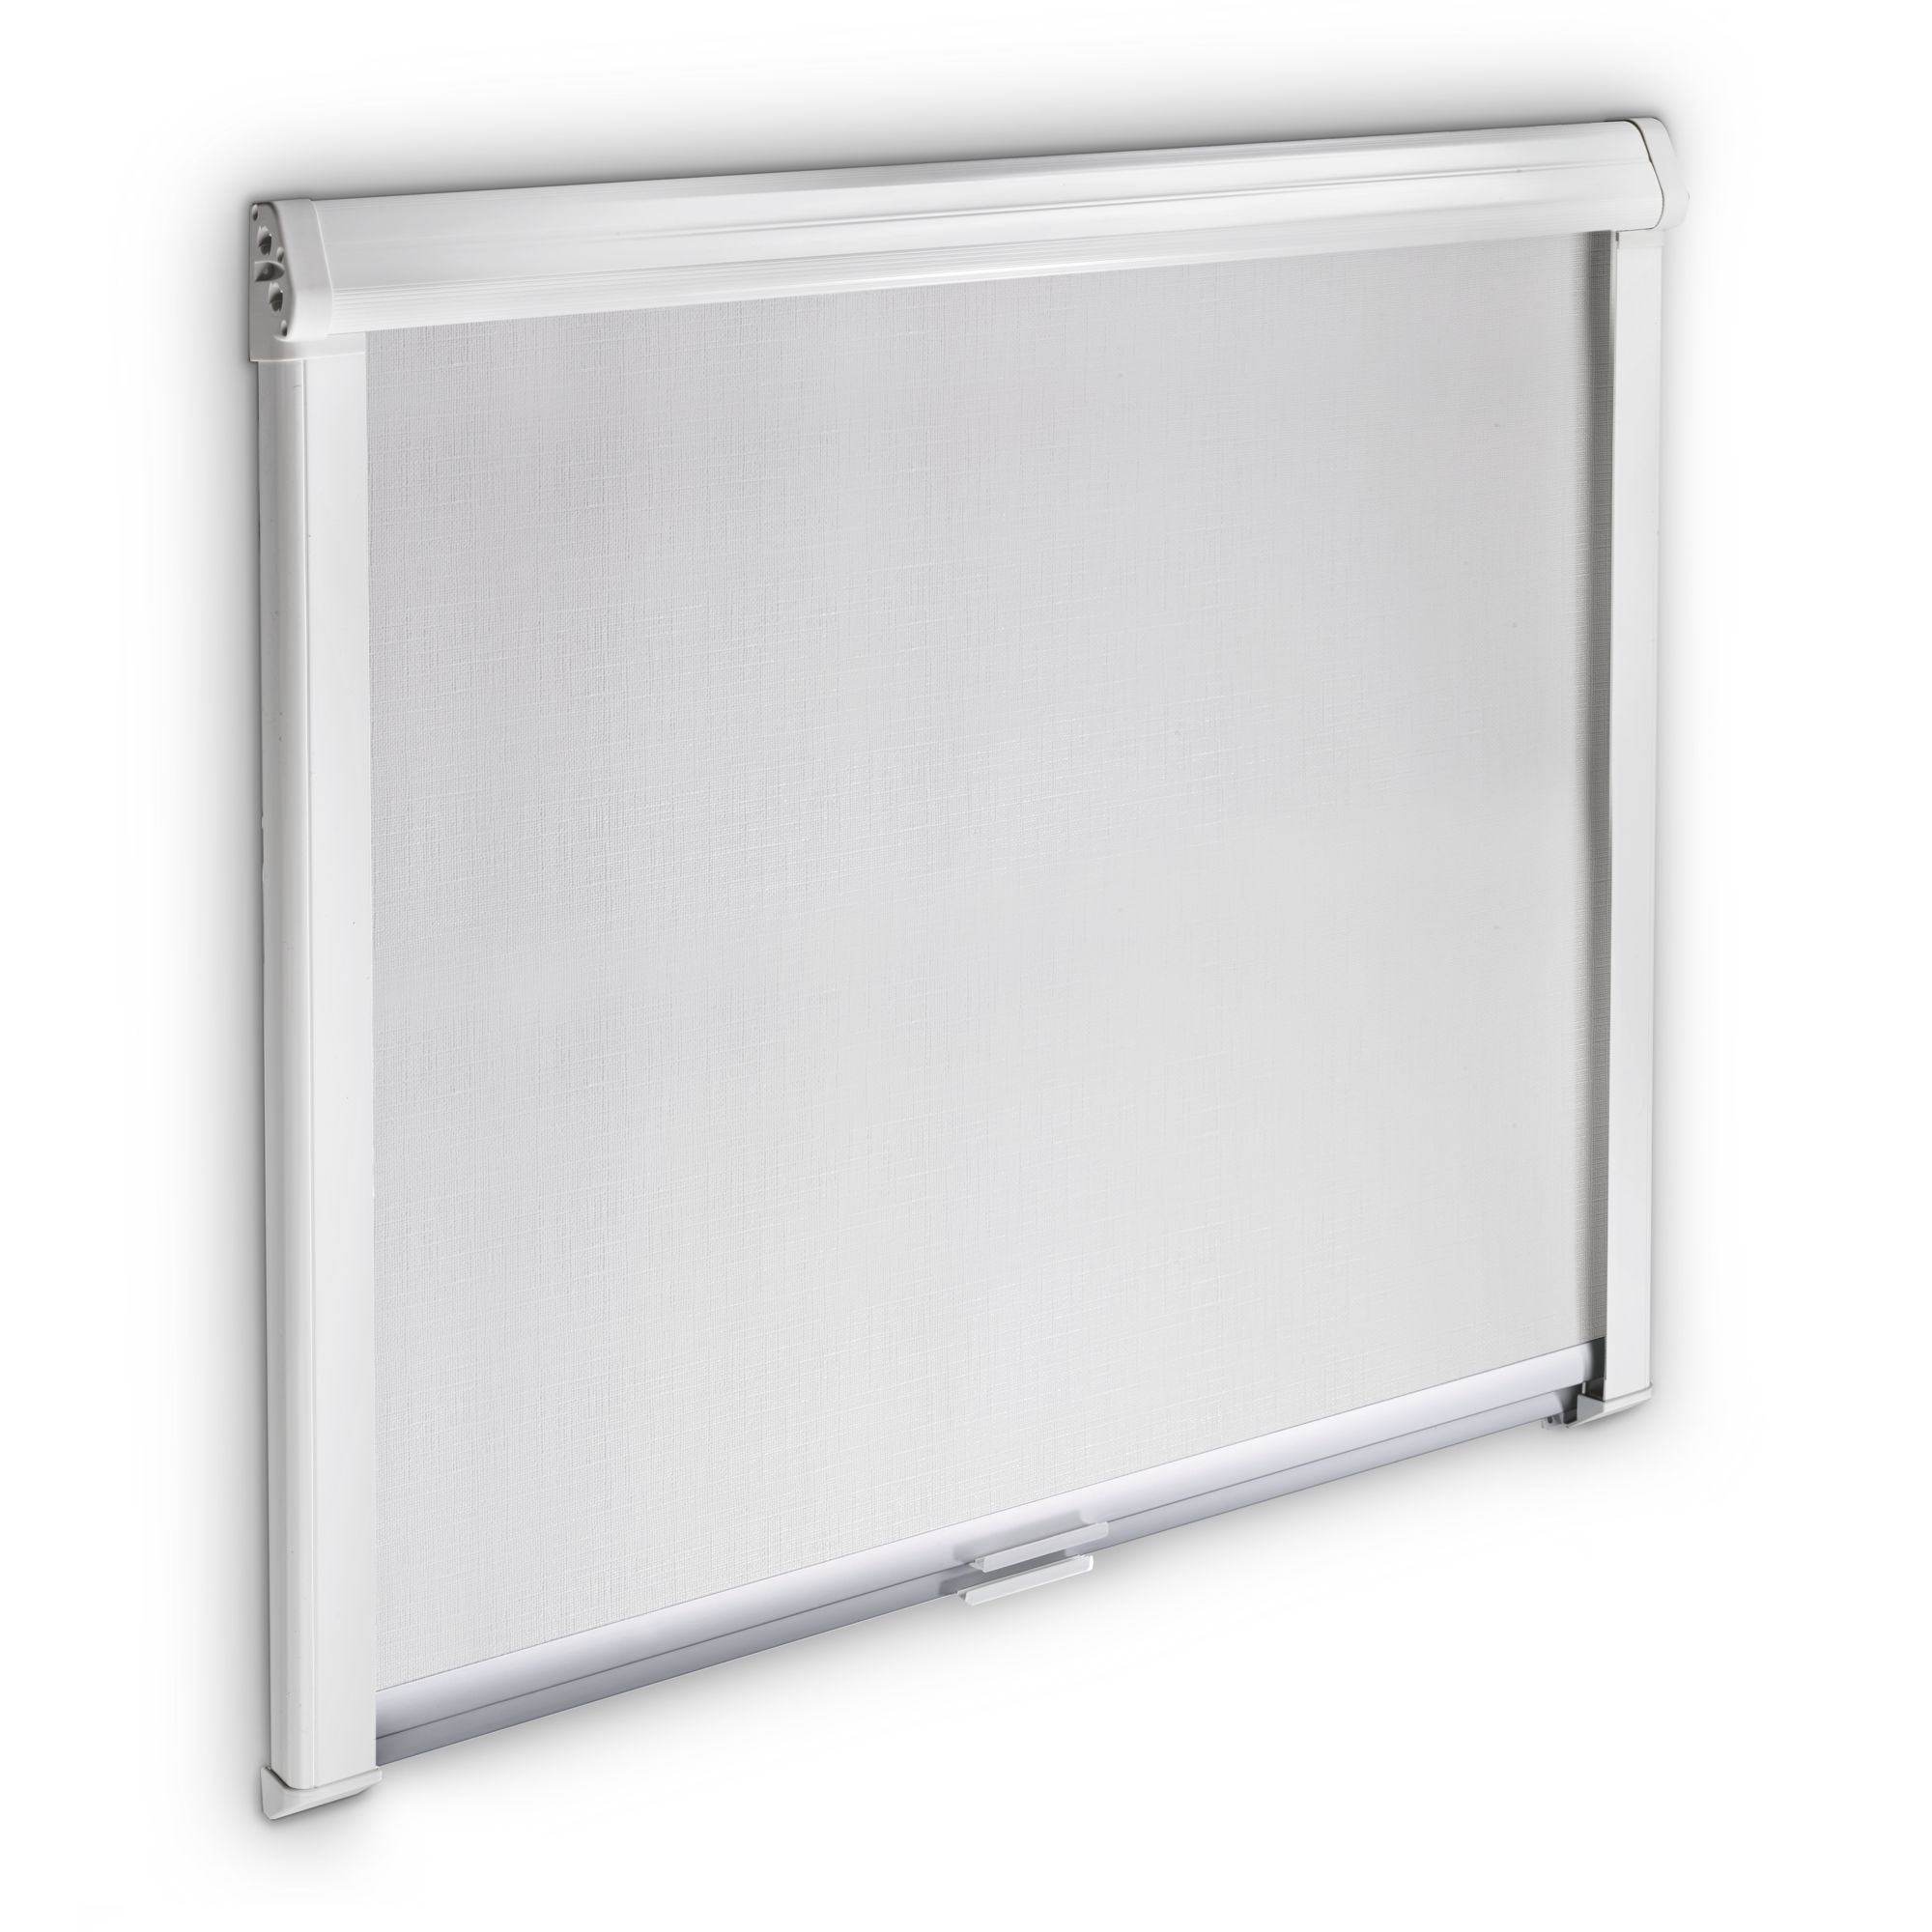 Dometic Black-Out Roller Blind 3000, 1060 x 710 mm, grey-white